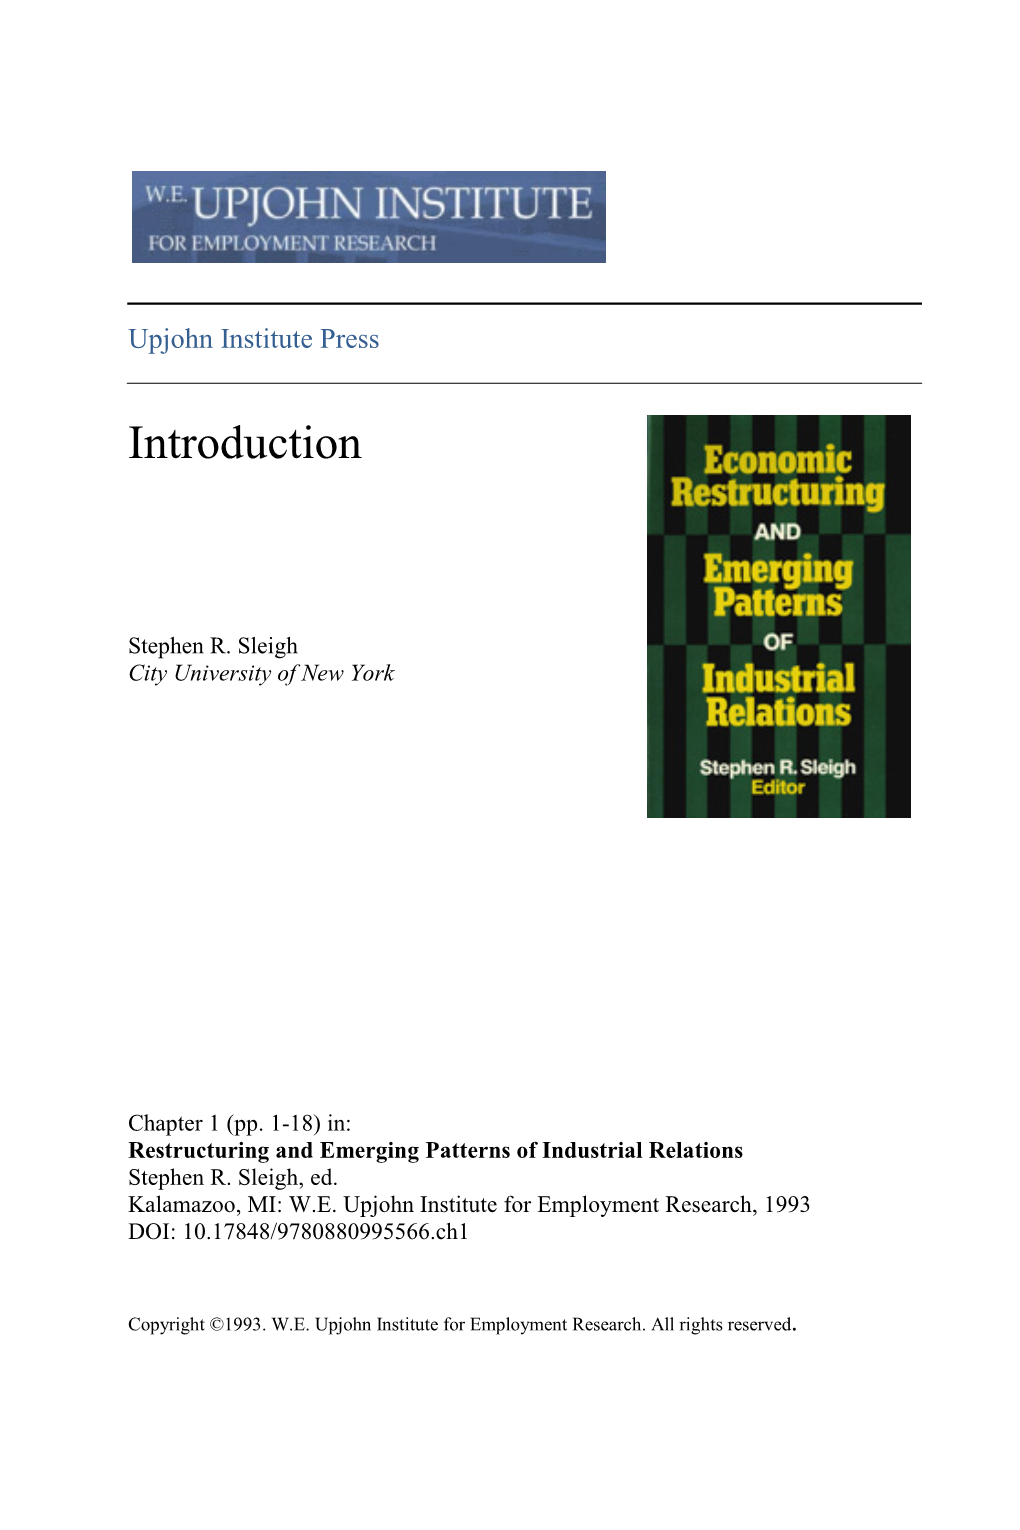 Introduction to Economic Restructuring and Emerging Patterns of Industrial Relations